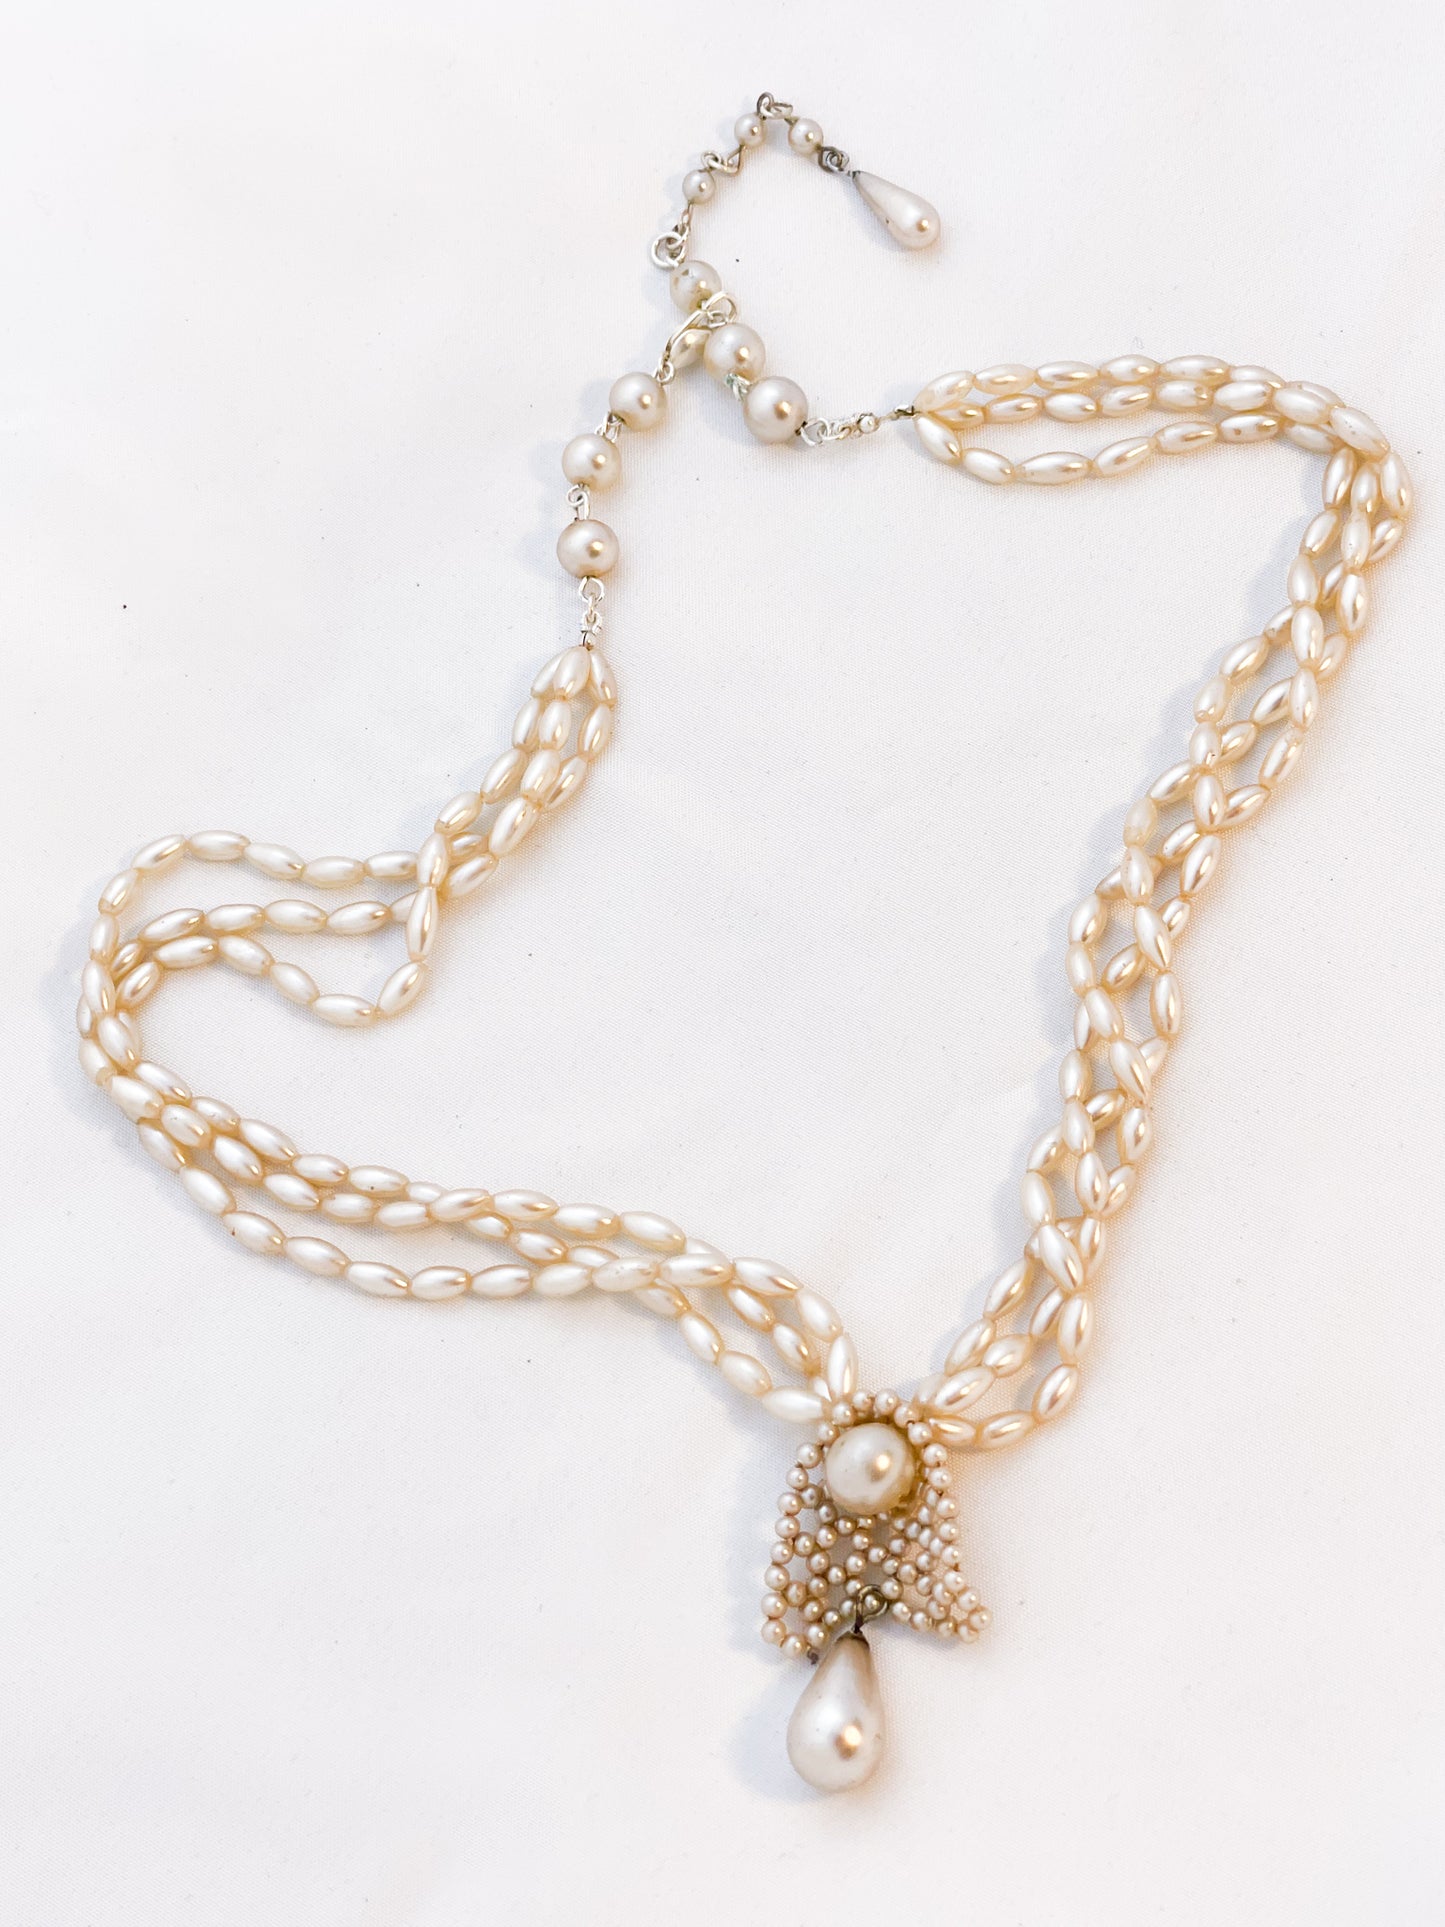 old-fashioned pearl necklace